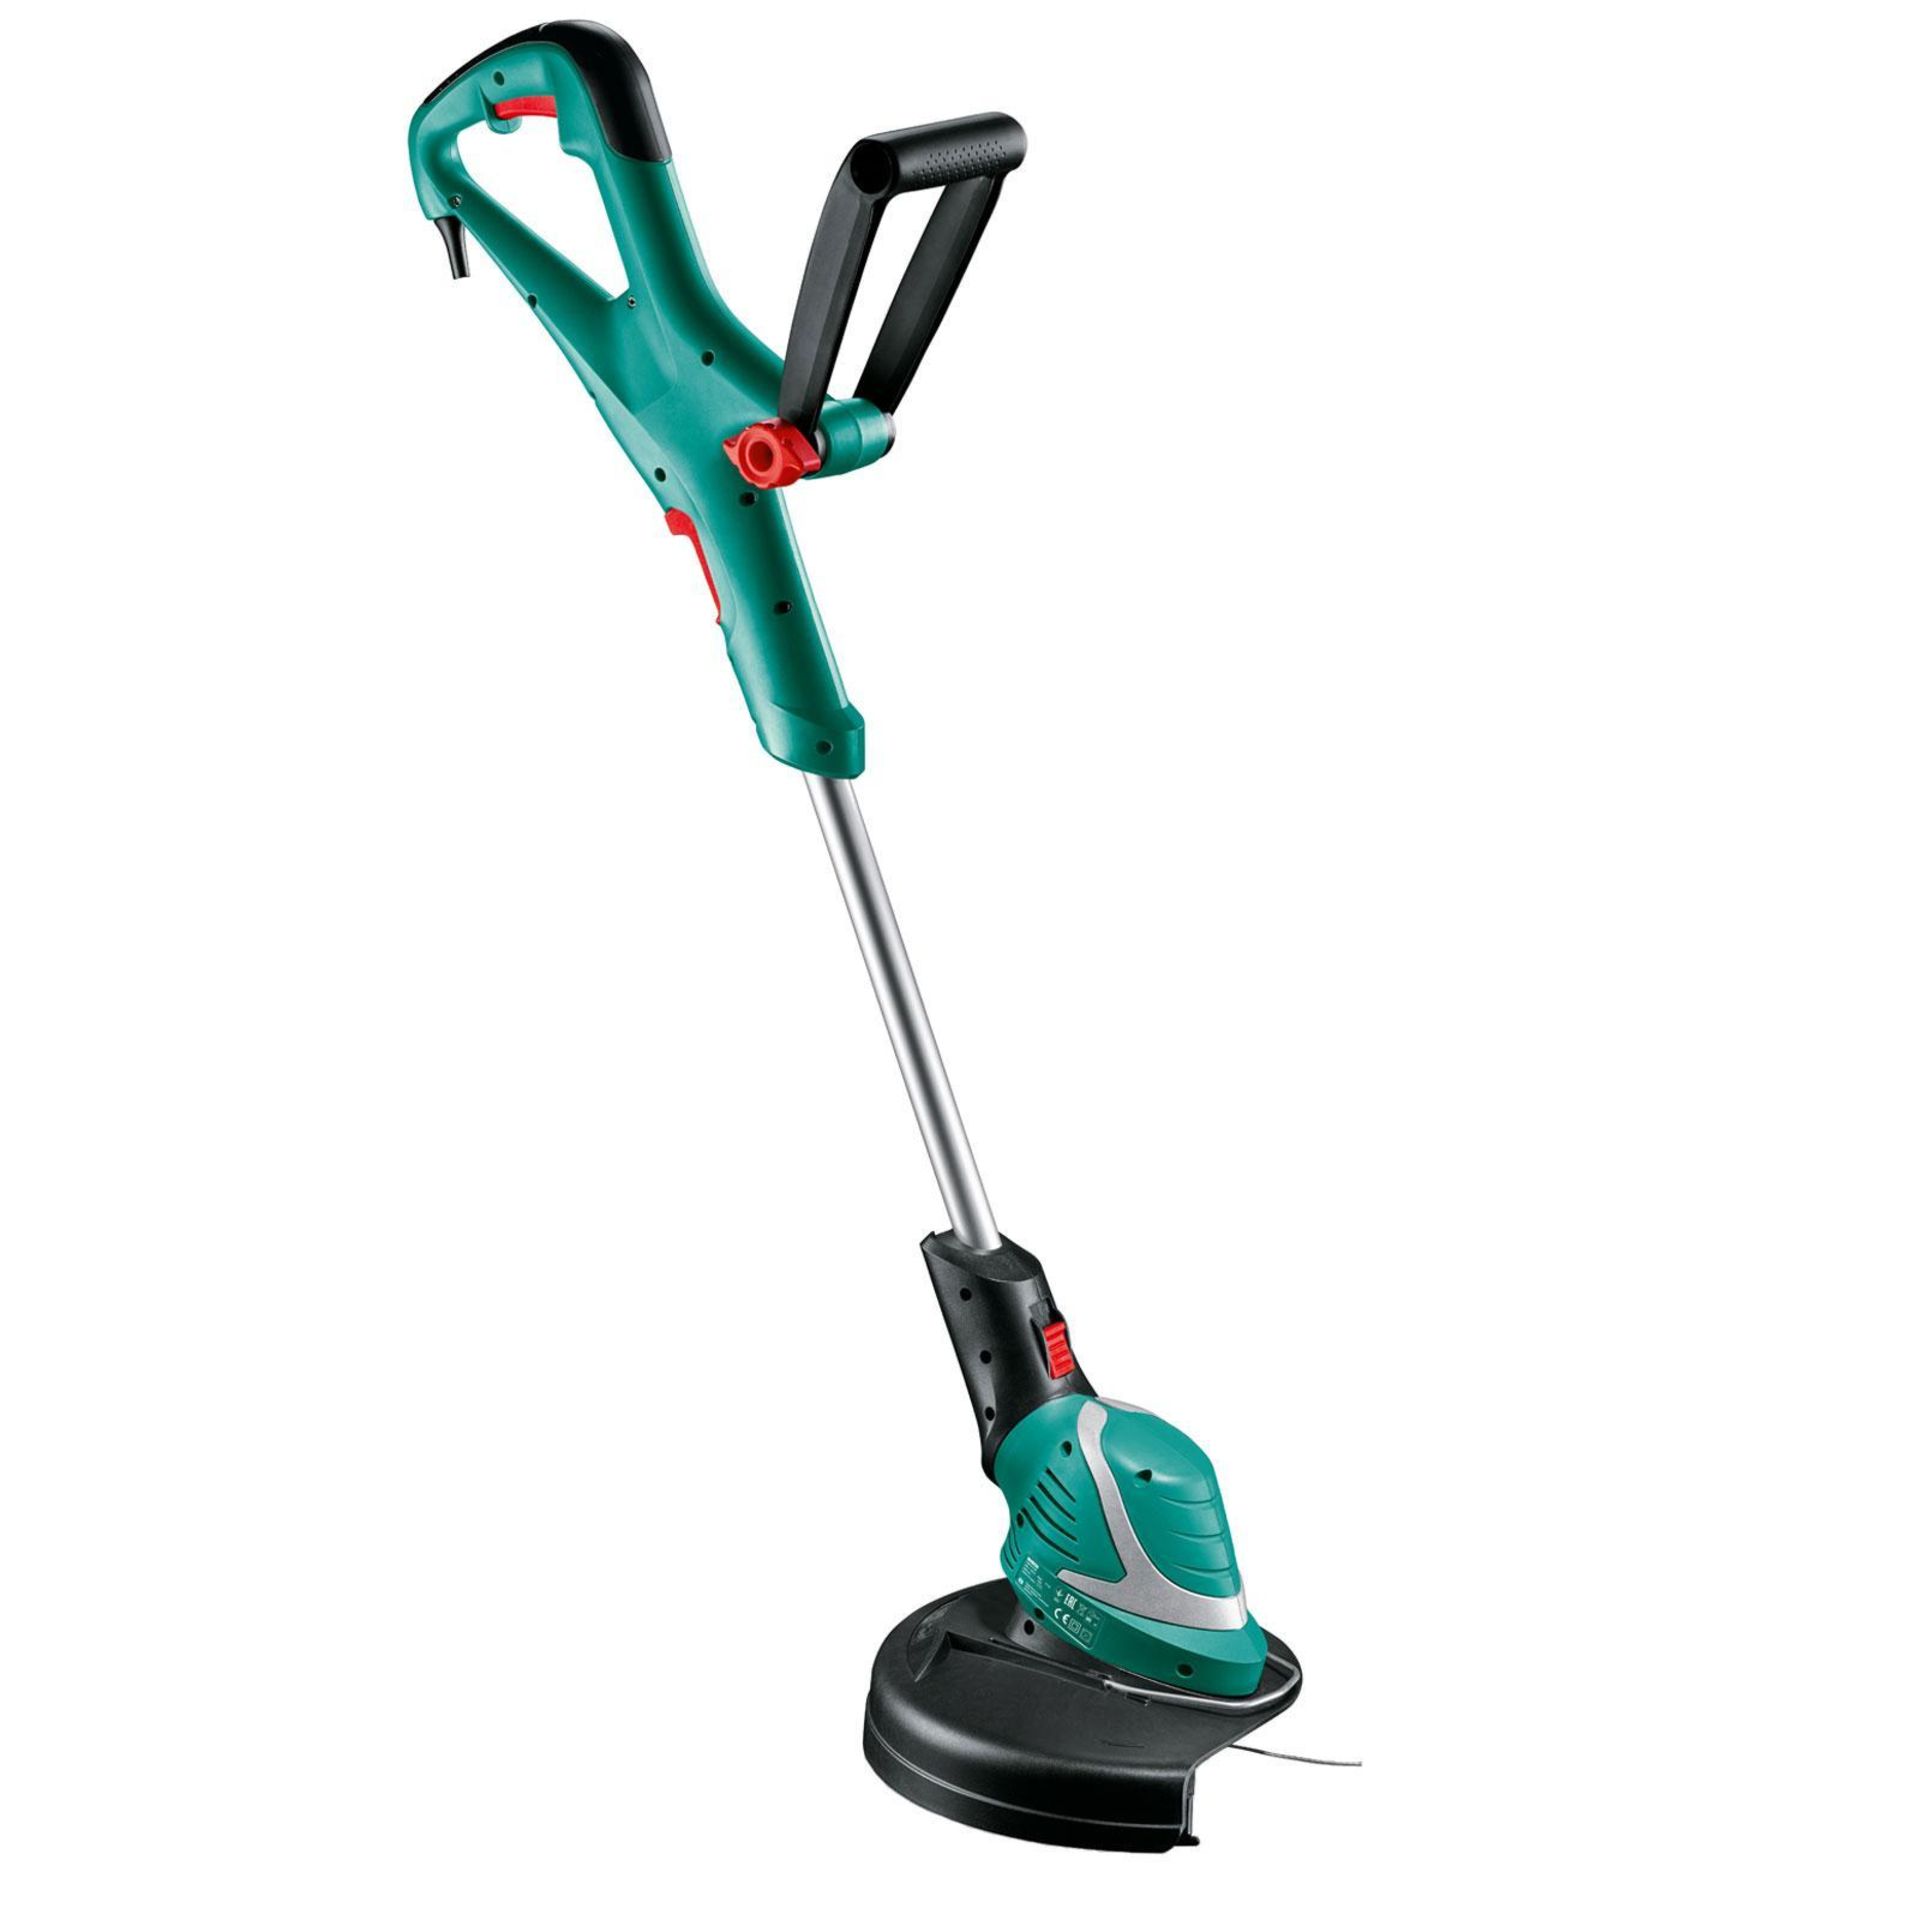 Bosch ART 30 Grass TrimmerWith a 550 Watt motor, this trimmer is one of Bosch's more powerful models